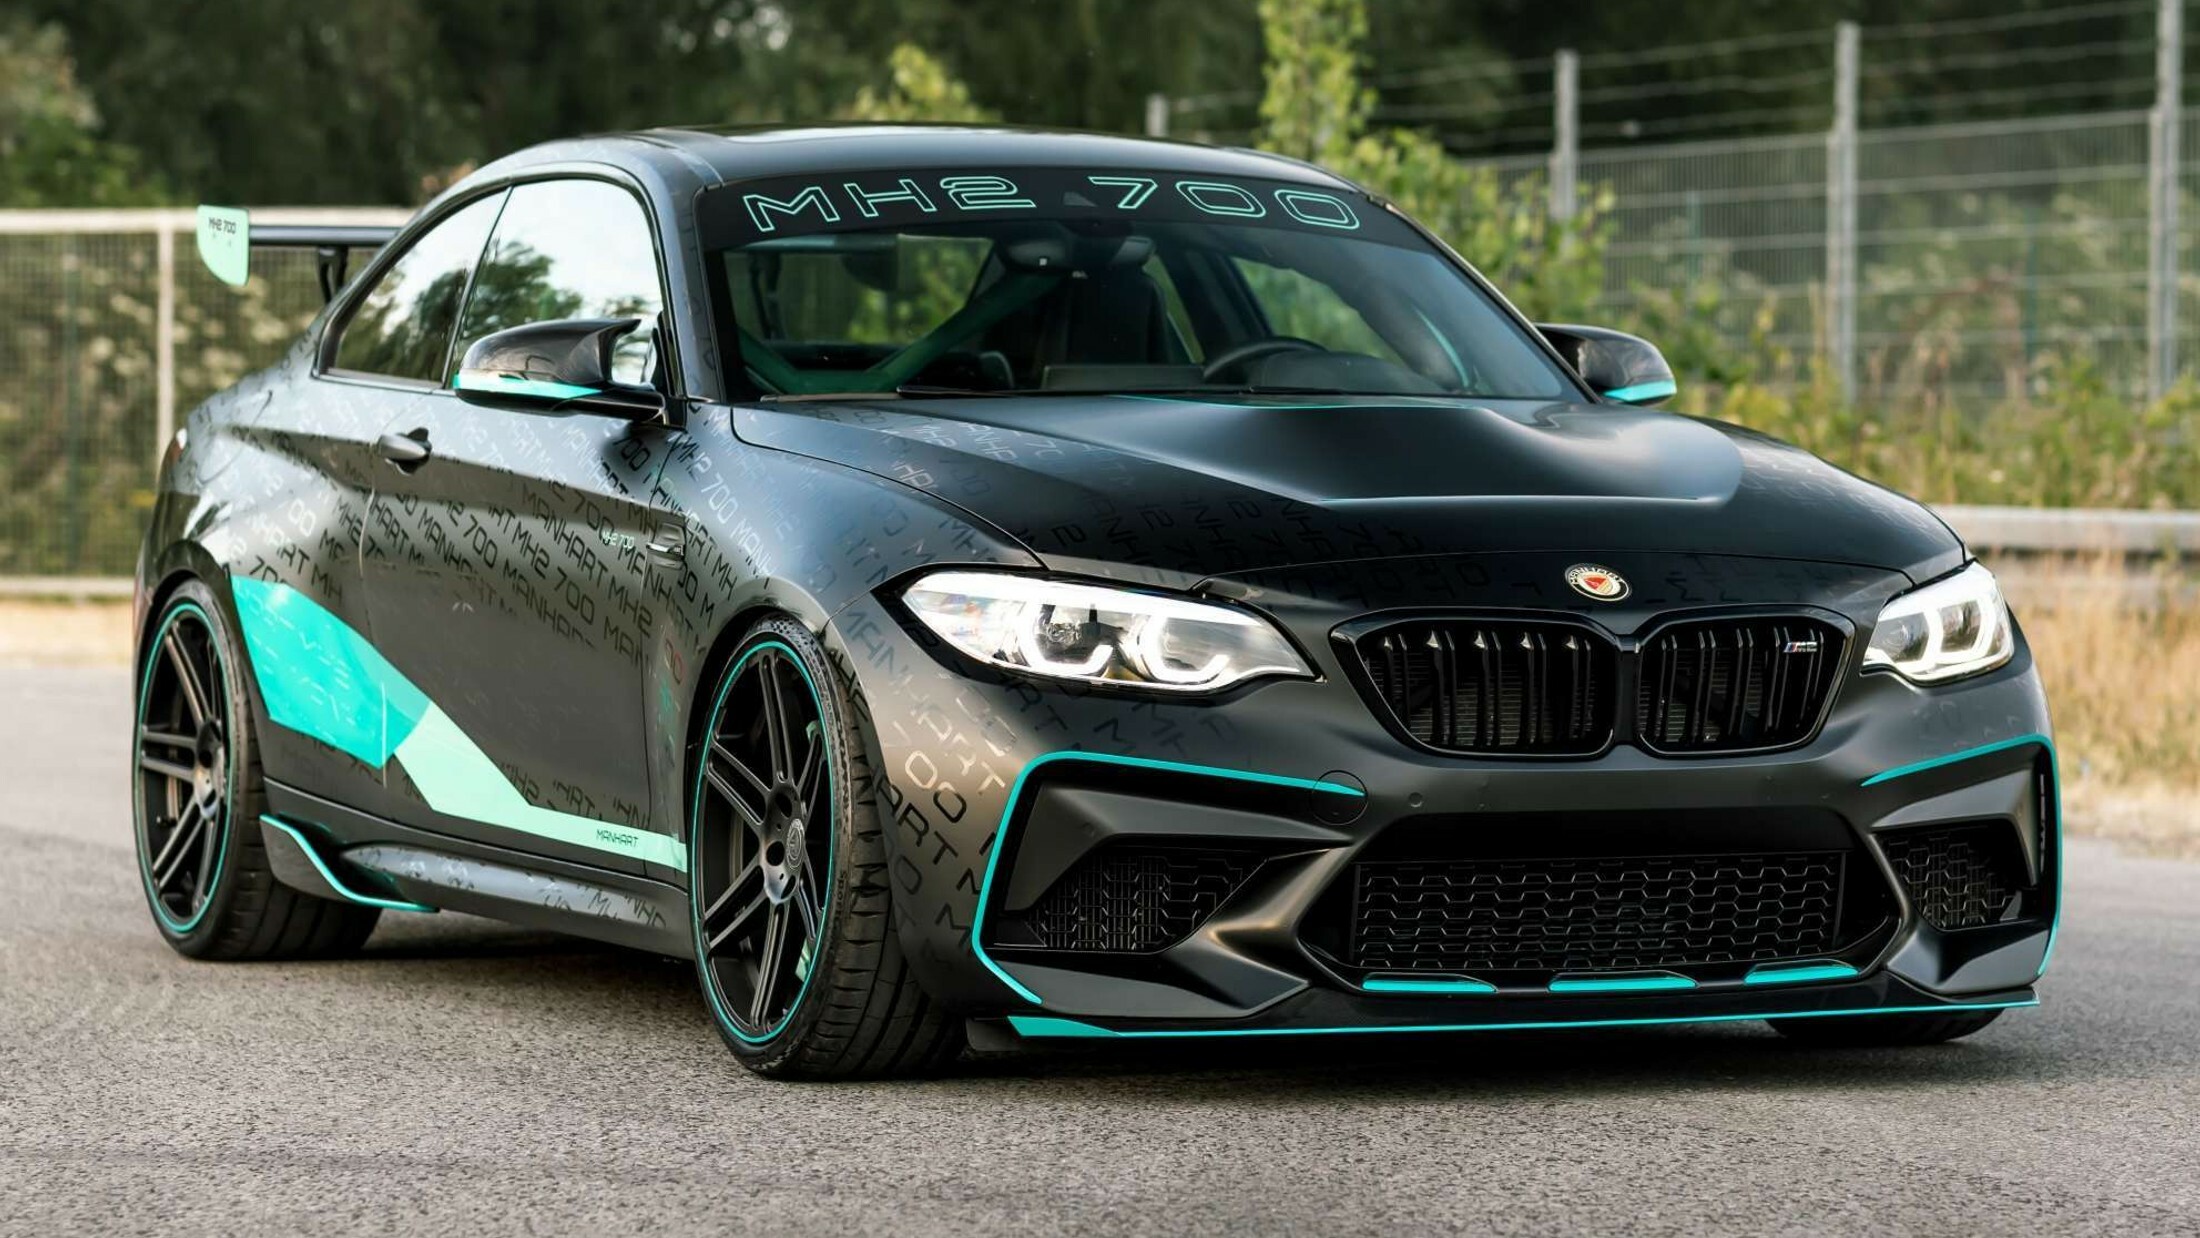 Manhart's Latest BMW M2 Competition F87 Makes A Crazy 705 HP